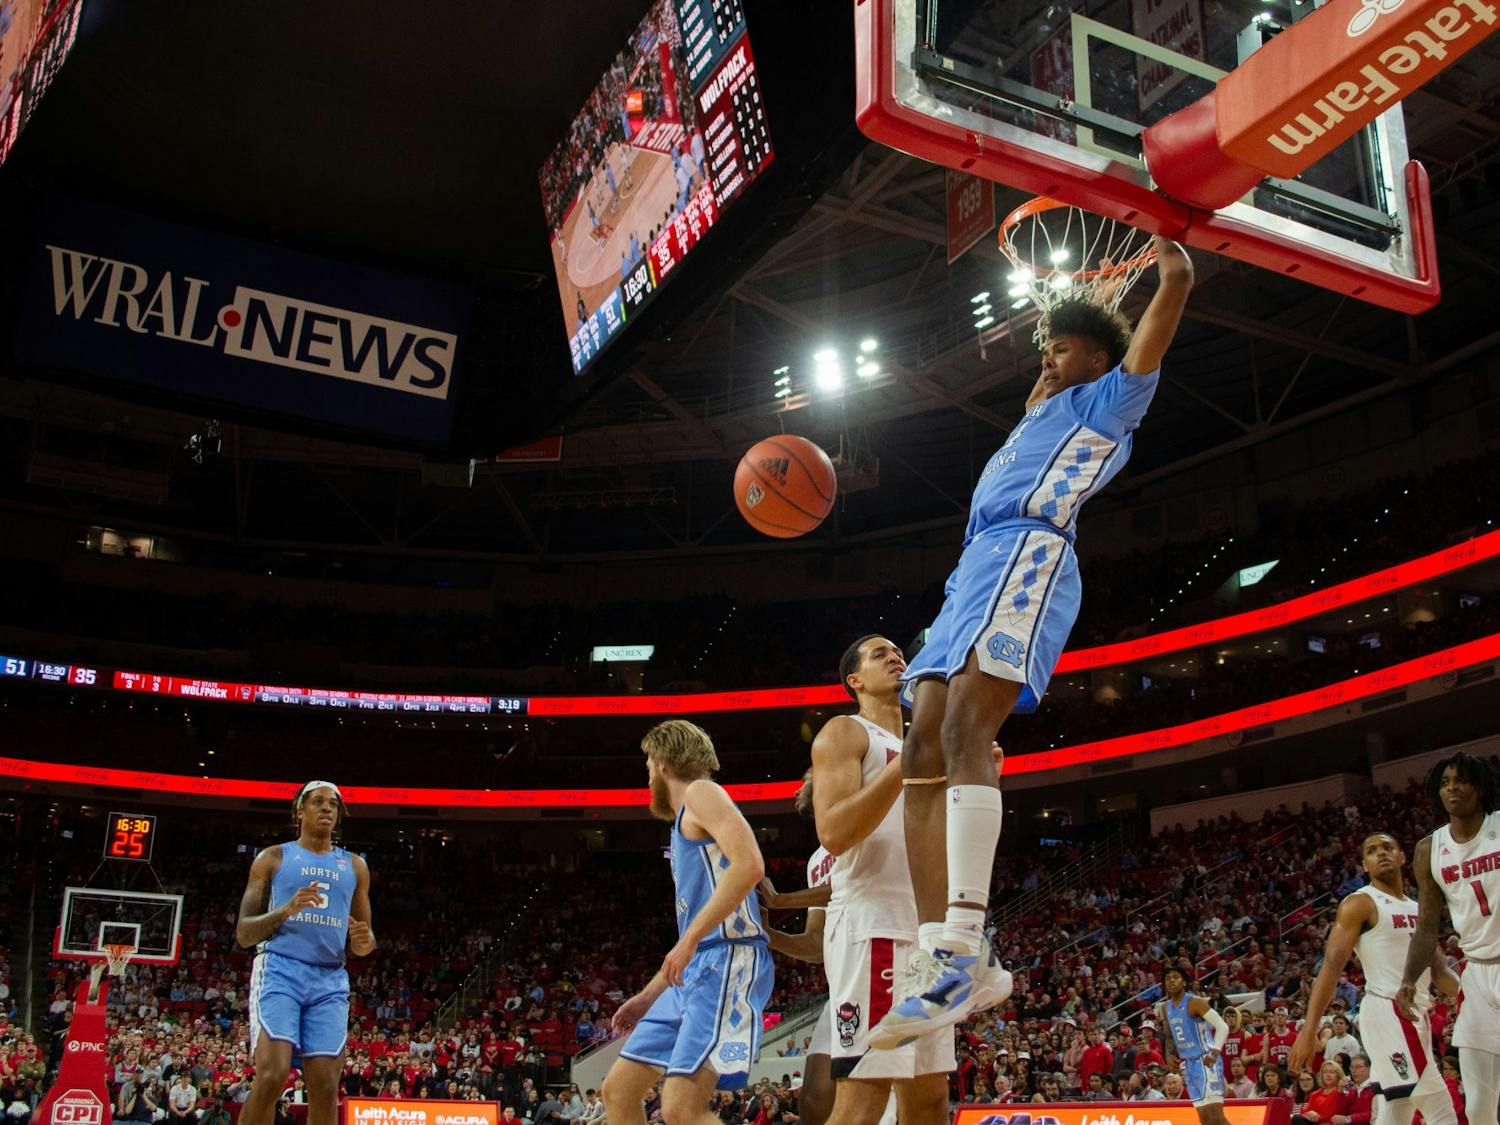 Sophomore guard Puff Johnson (14) hangs on the basketball hoop after a goal during UNC's rivalry game against NC State on Feb. 26, 2022. UNC won that game 84-74.